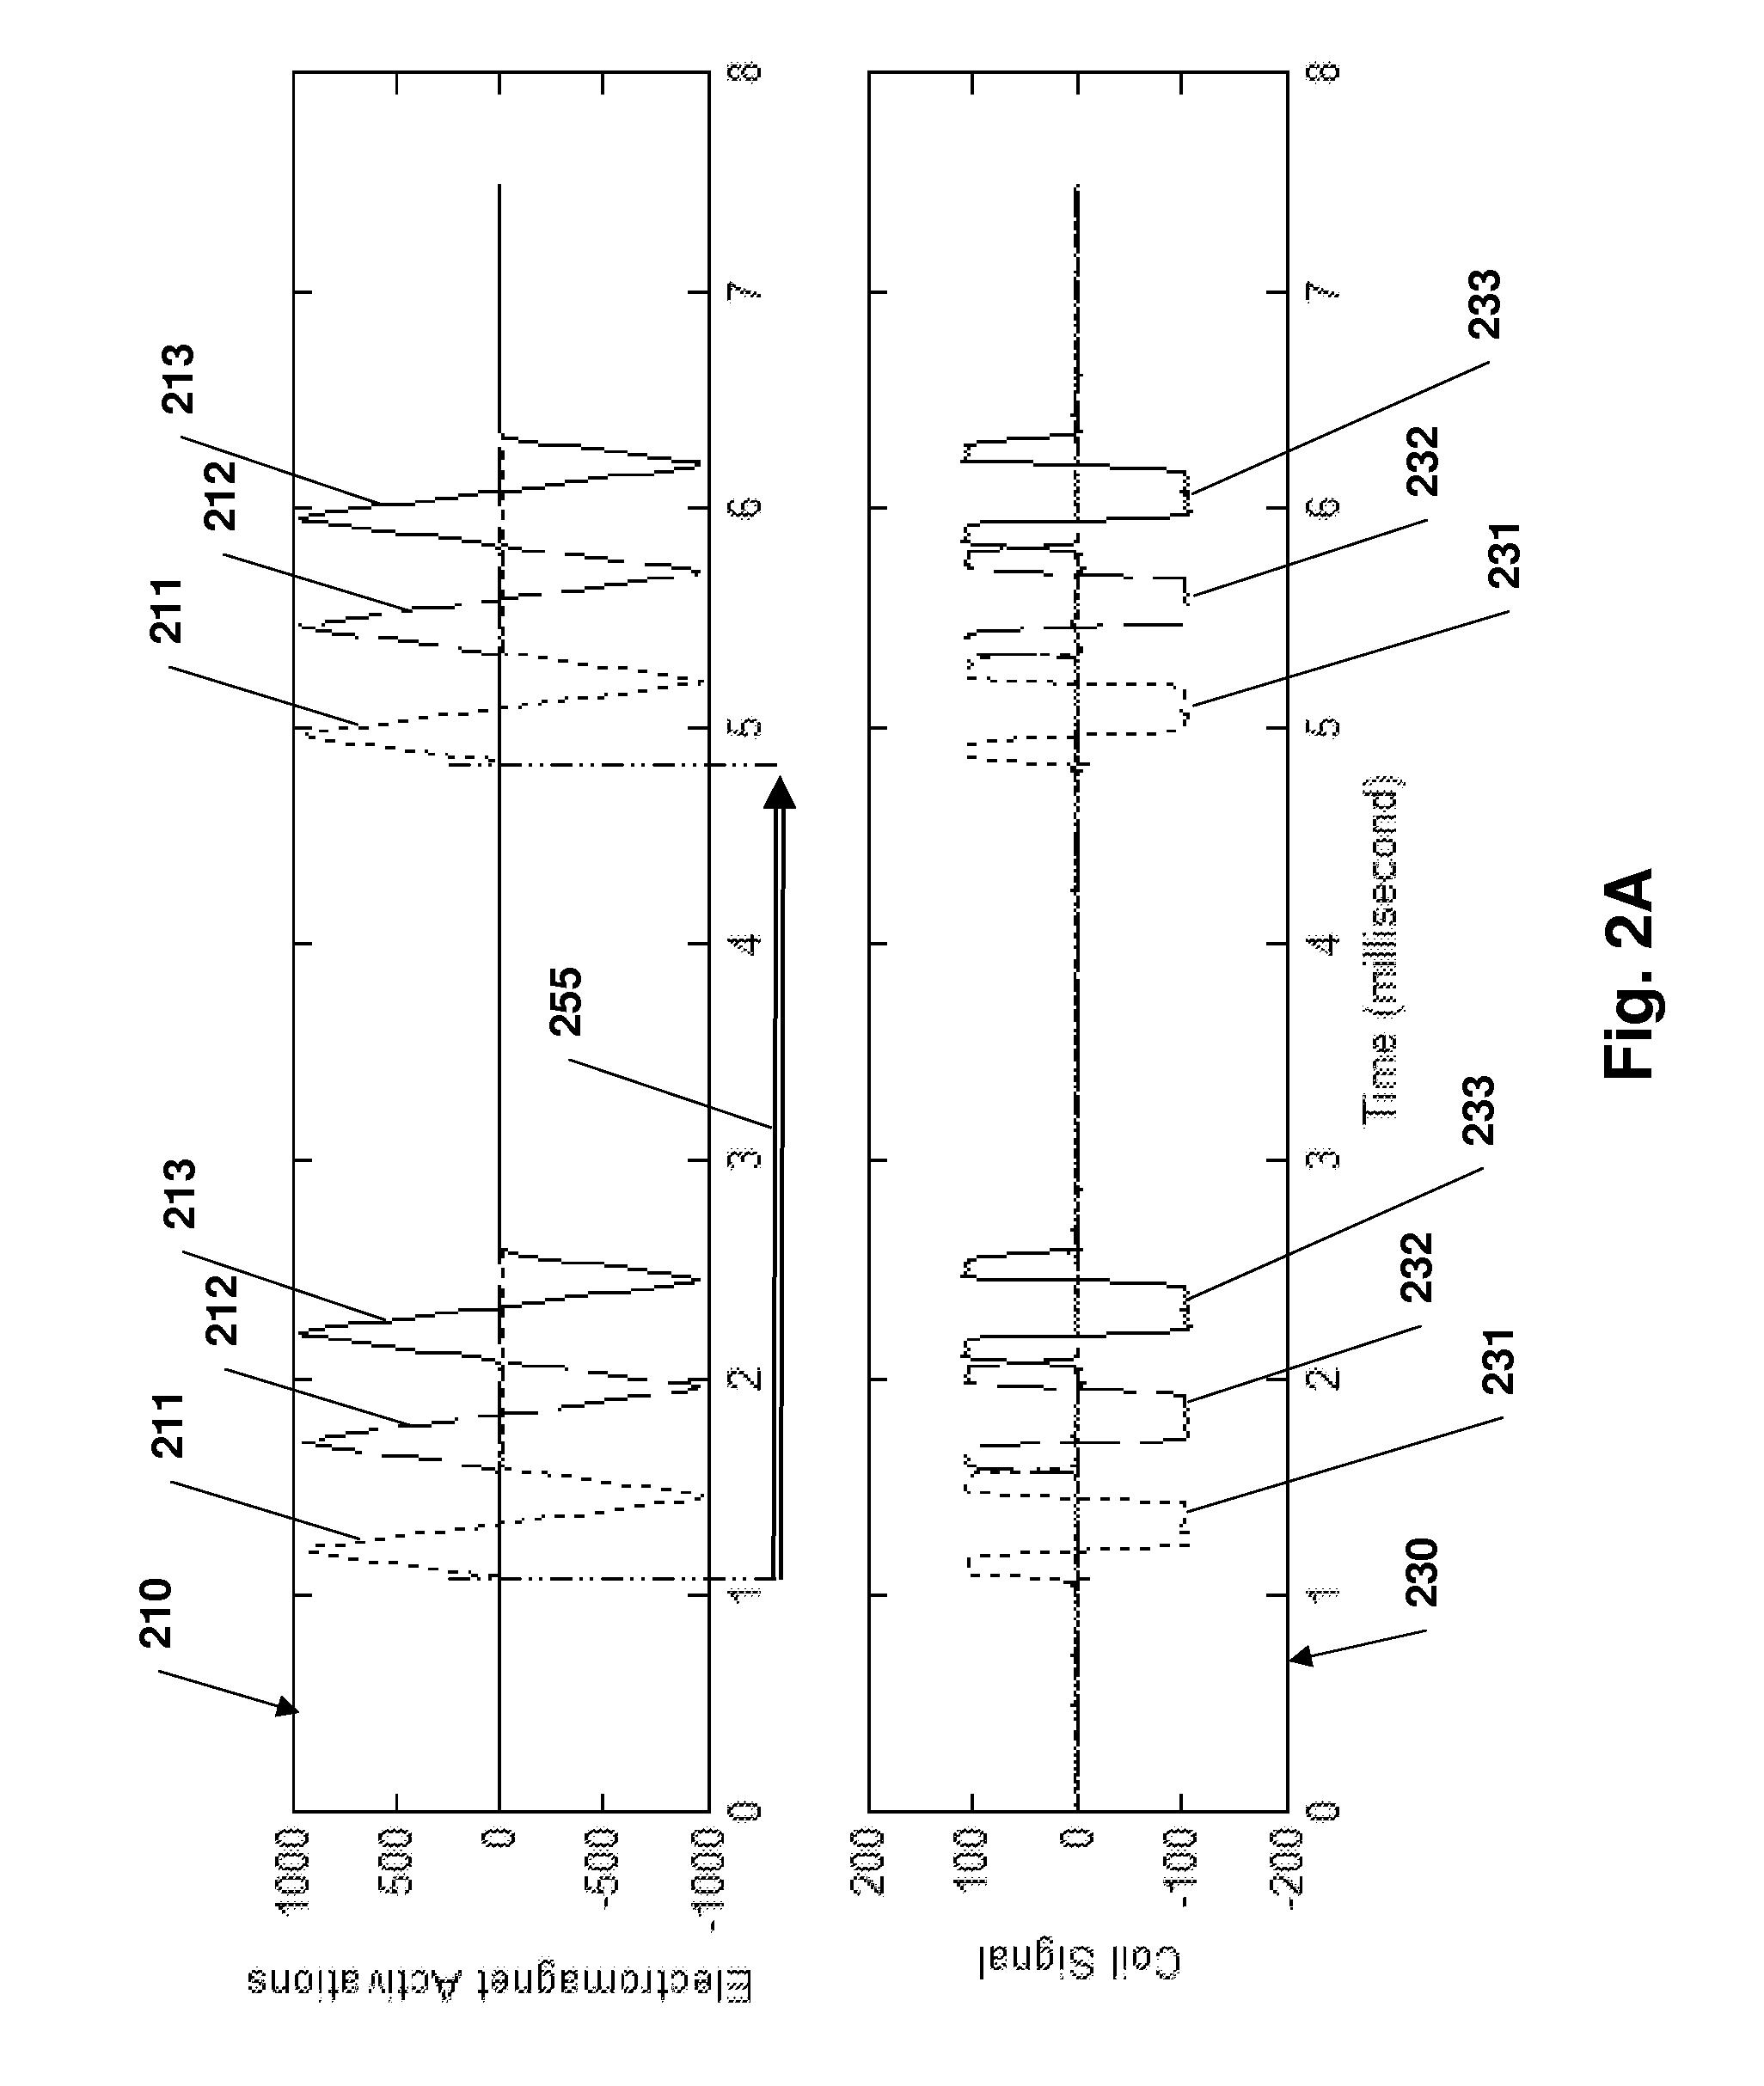 System and method to estimate location and orientation of an object